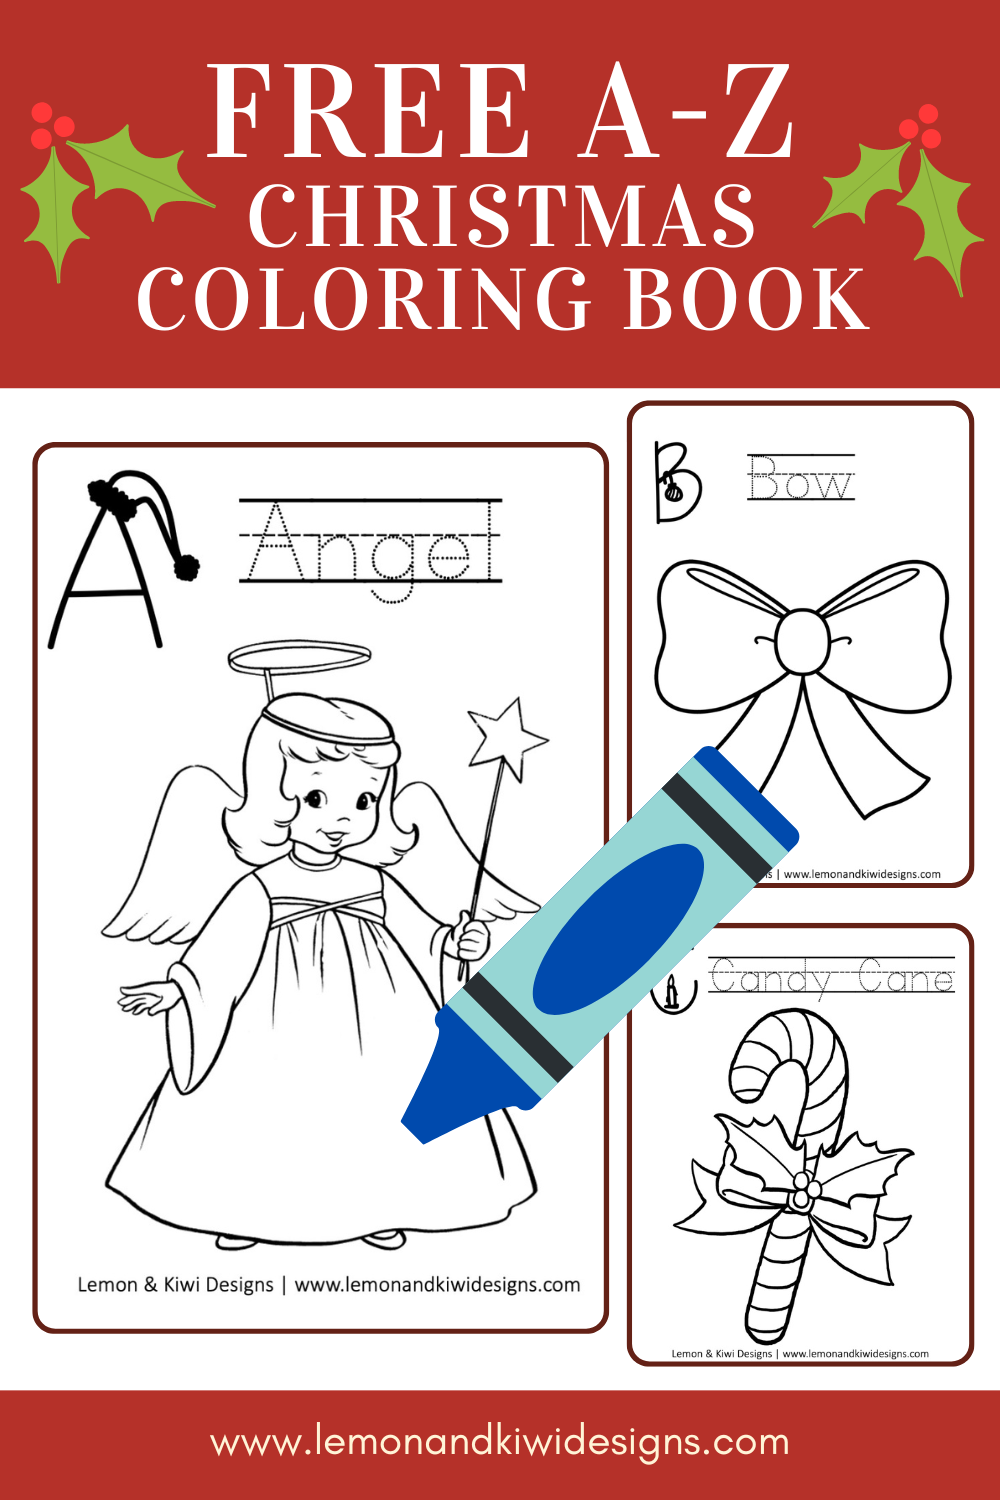 Free Printable Christmas Coloring Book for Kids with A to Z Words